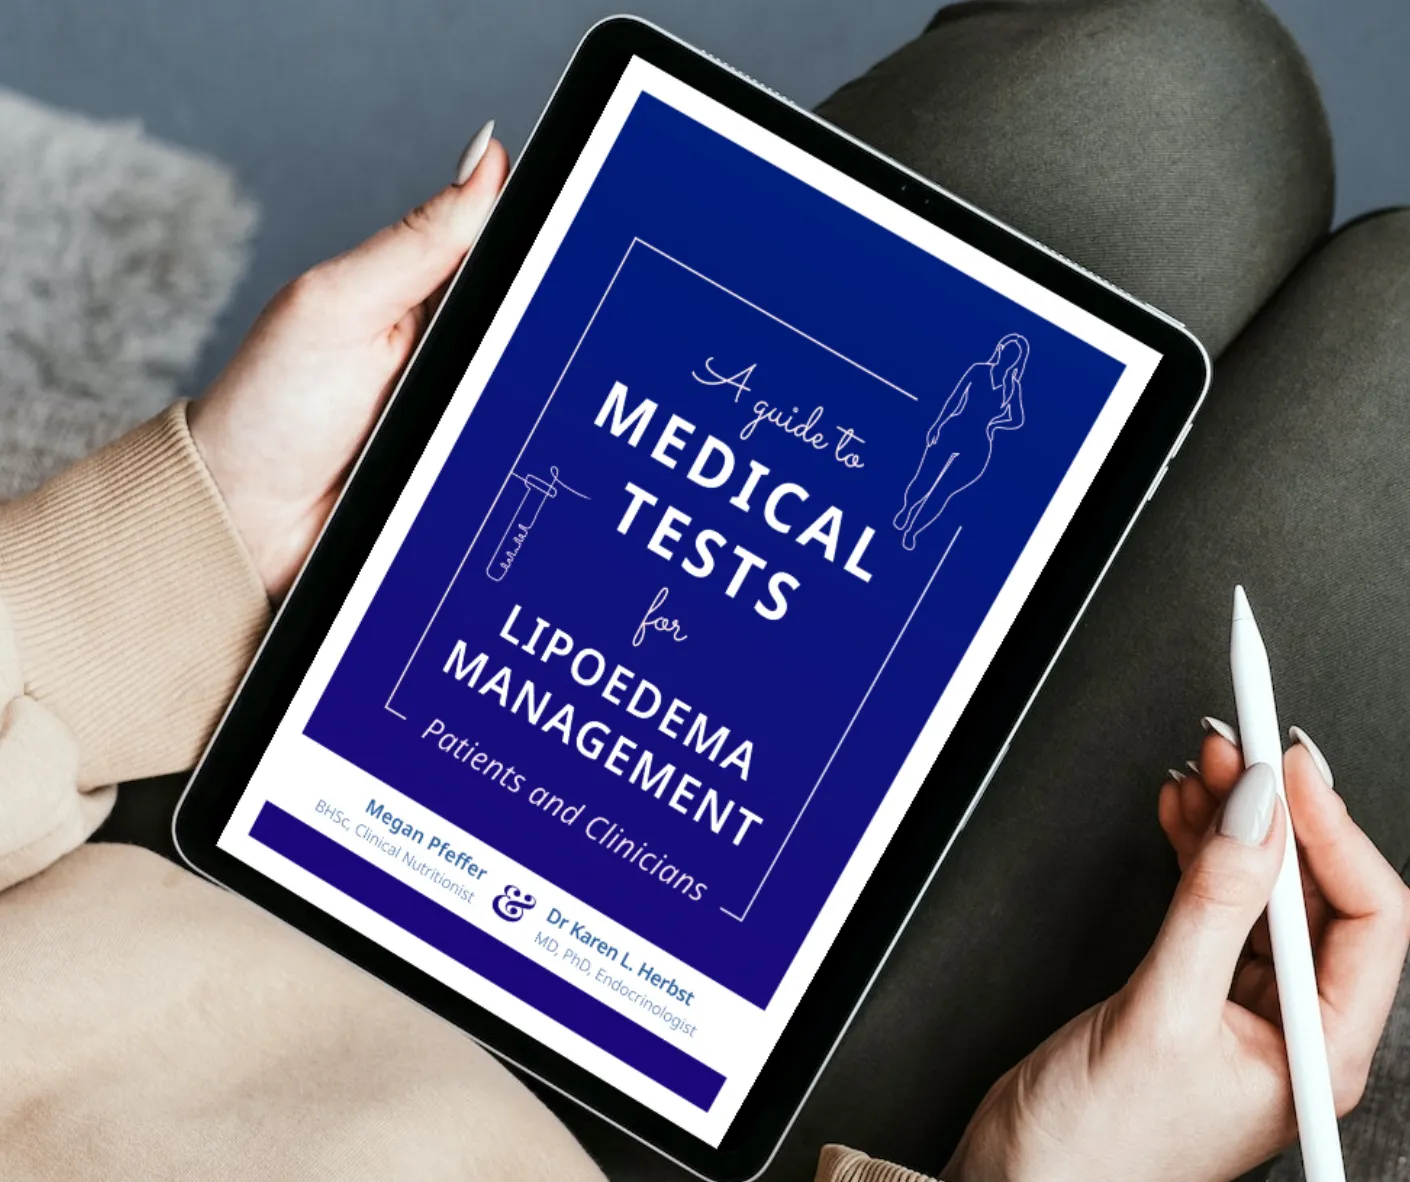 An ipad in a woman's lap with picture of Megan Pfeffer's book 'A guide to medical tests for lipoedema and lymphoedema'